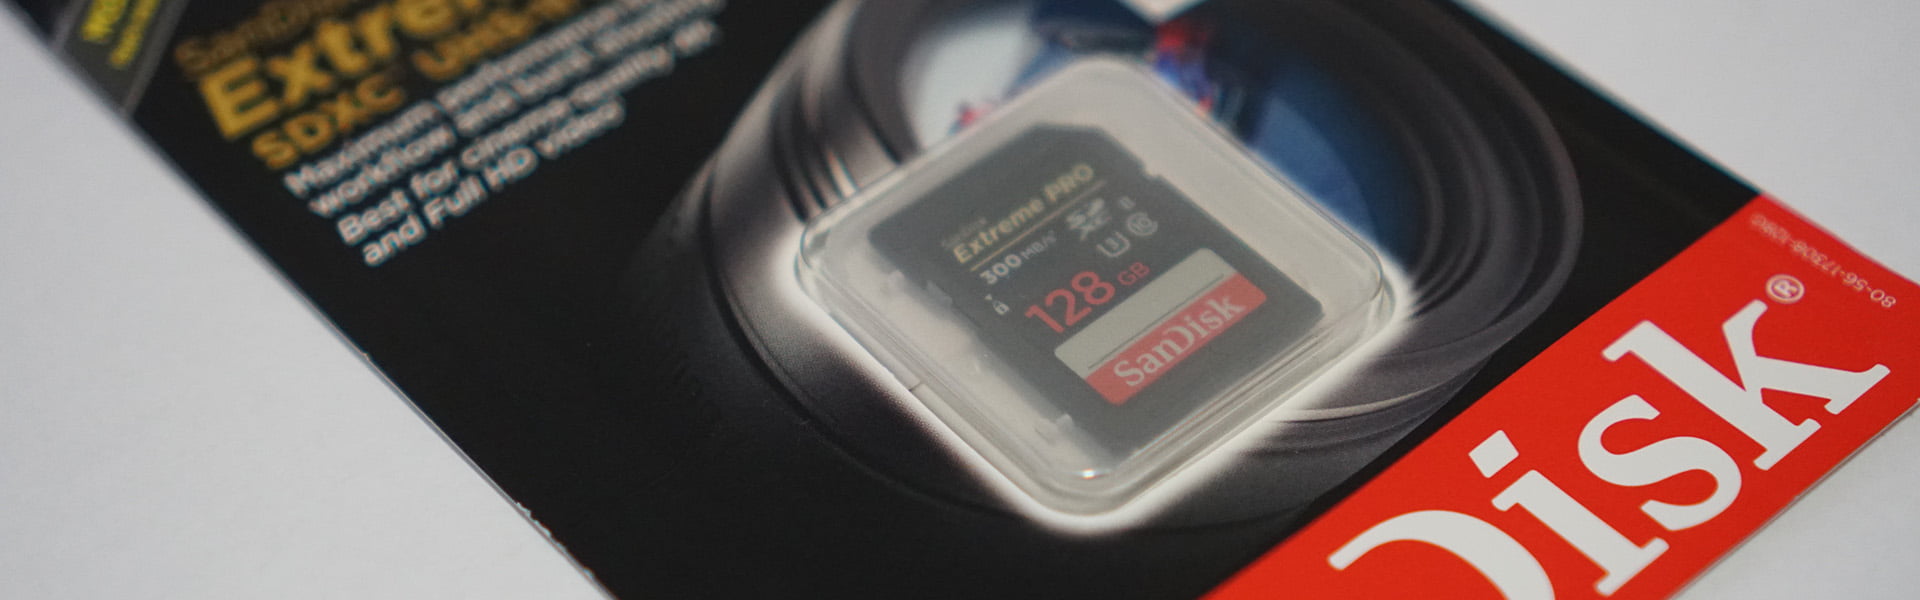 SanDisk Extreme PRO SD UHS-II Memory Card Review 18